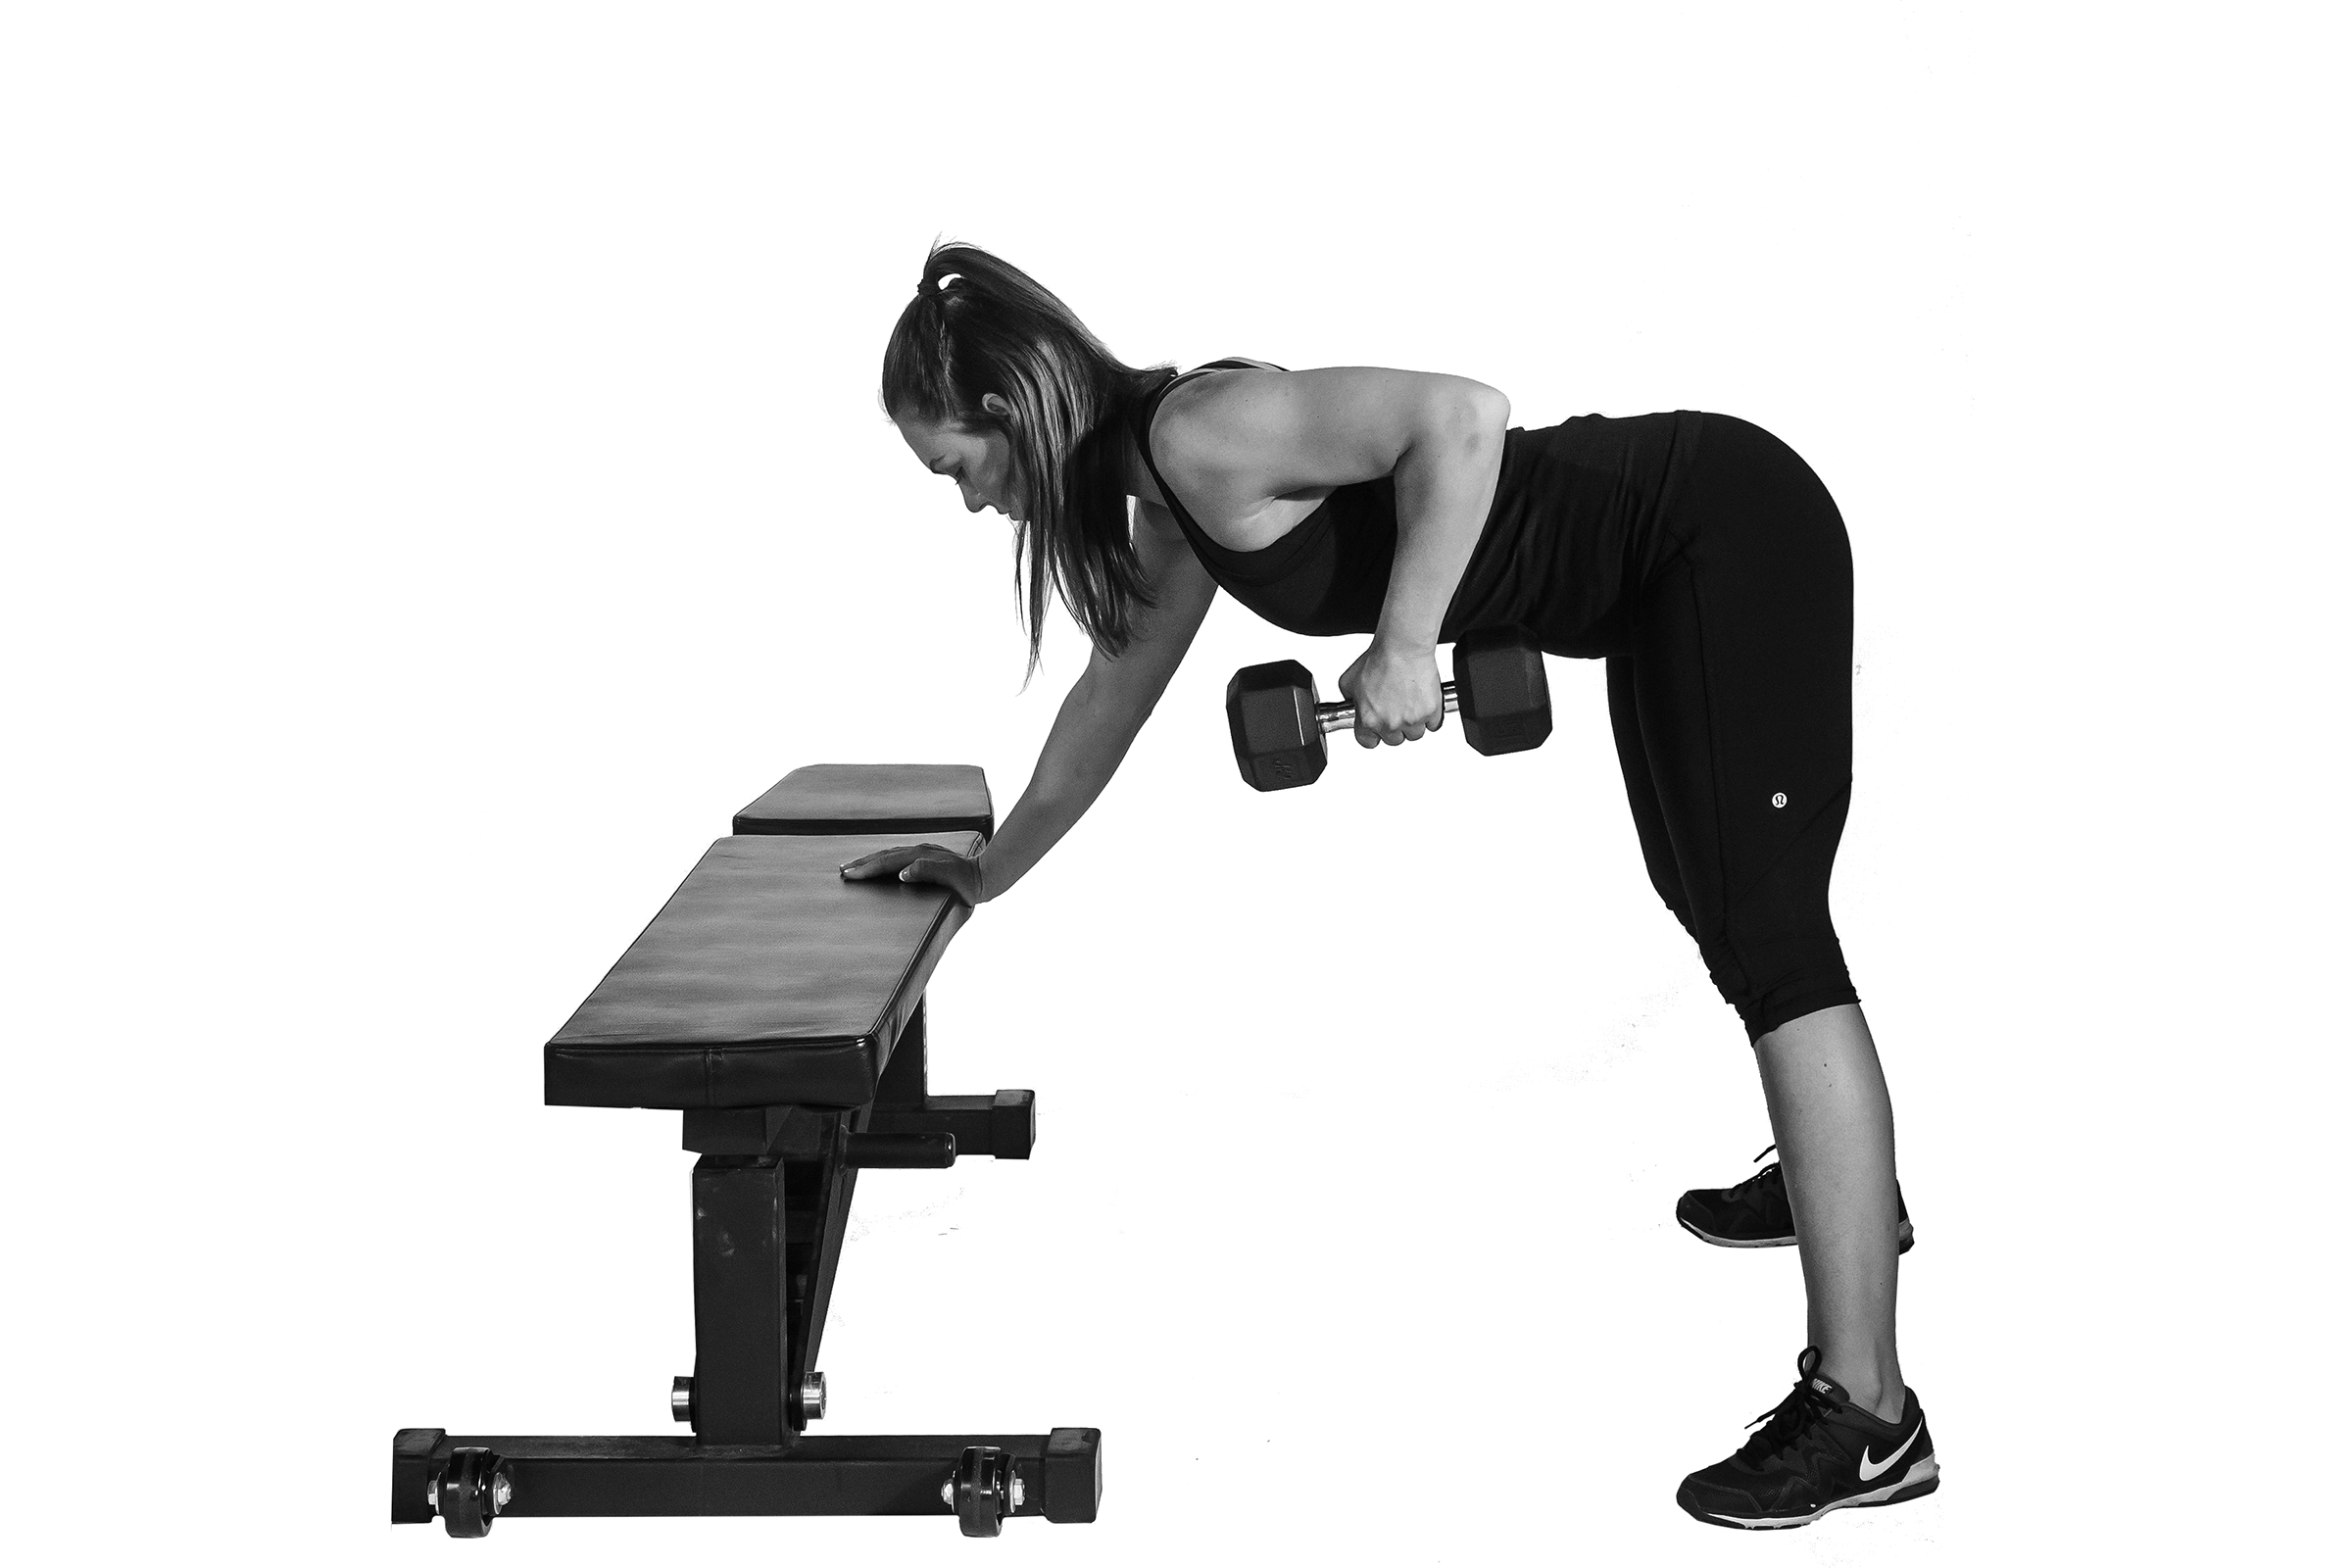 Upper Body Exercises to Do with Dumbbells | Reader's Digest